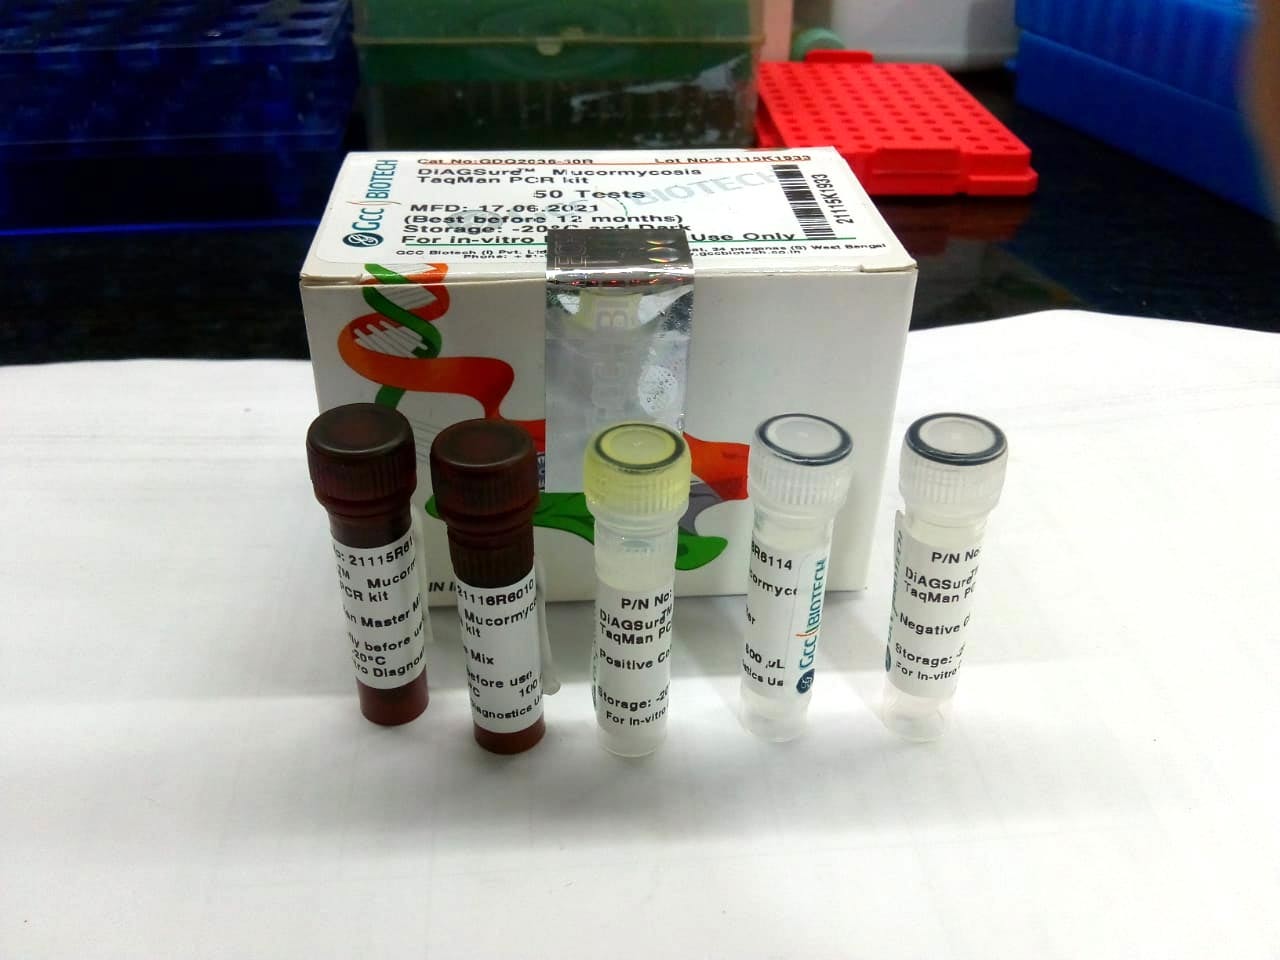 India's First Mucormycosis detection kit made in Bengal!